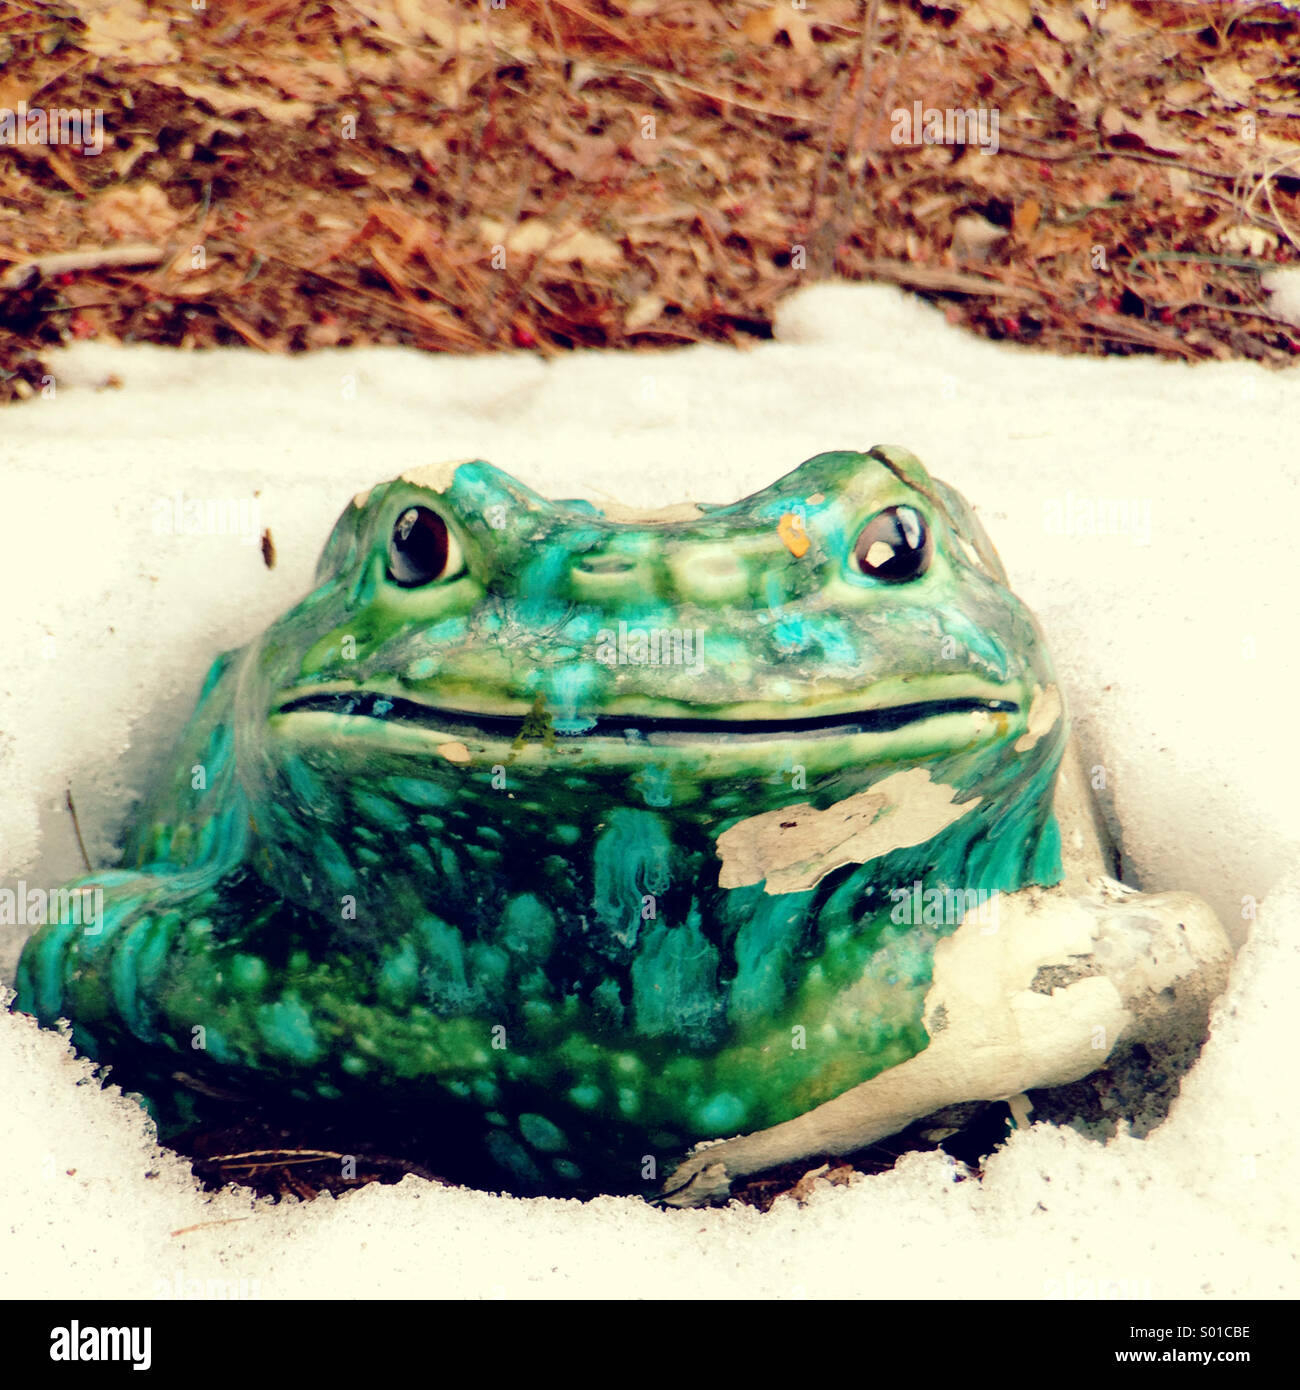 Frog lawn ornament. Stock Photo